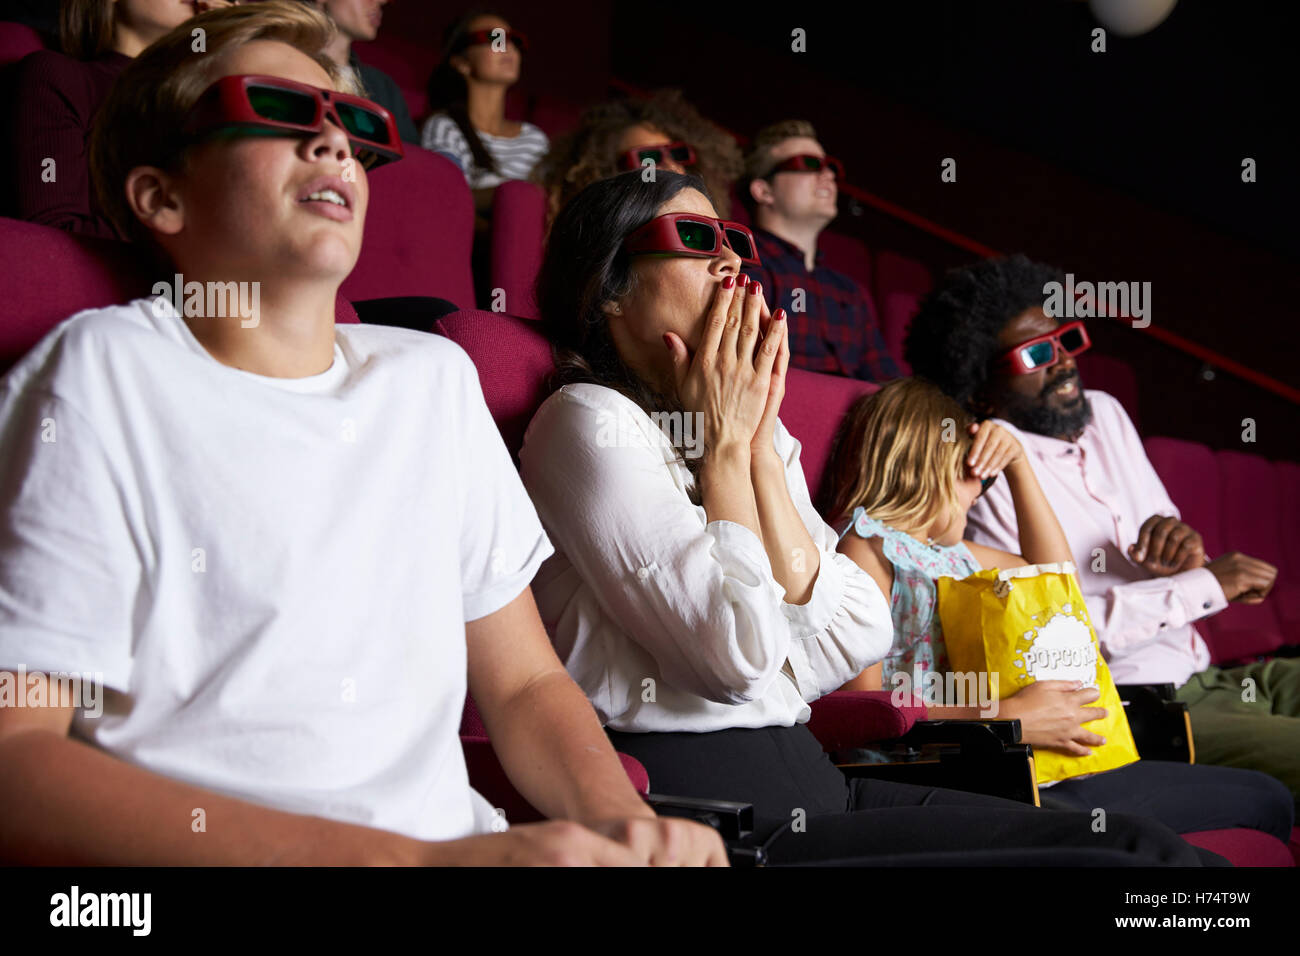 Audience In Cinema Wearing 3D Glasses Watching Horror Film Stock Photo